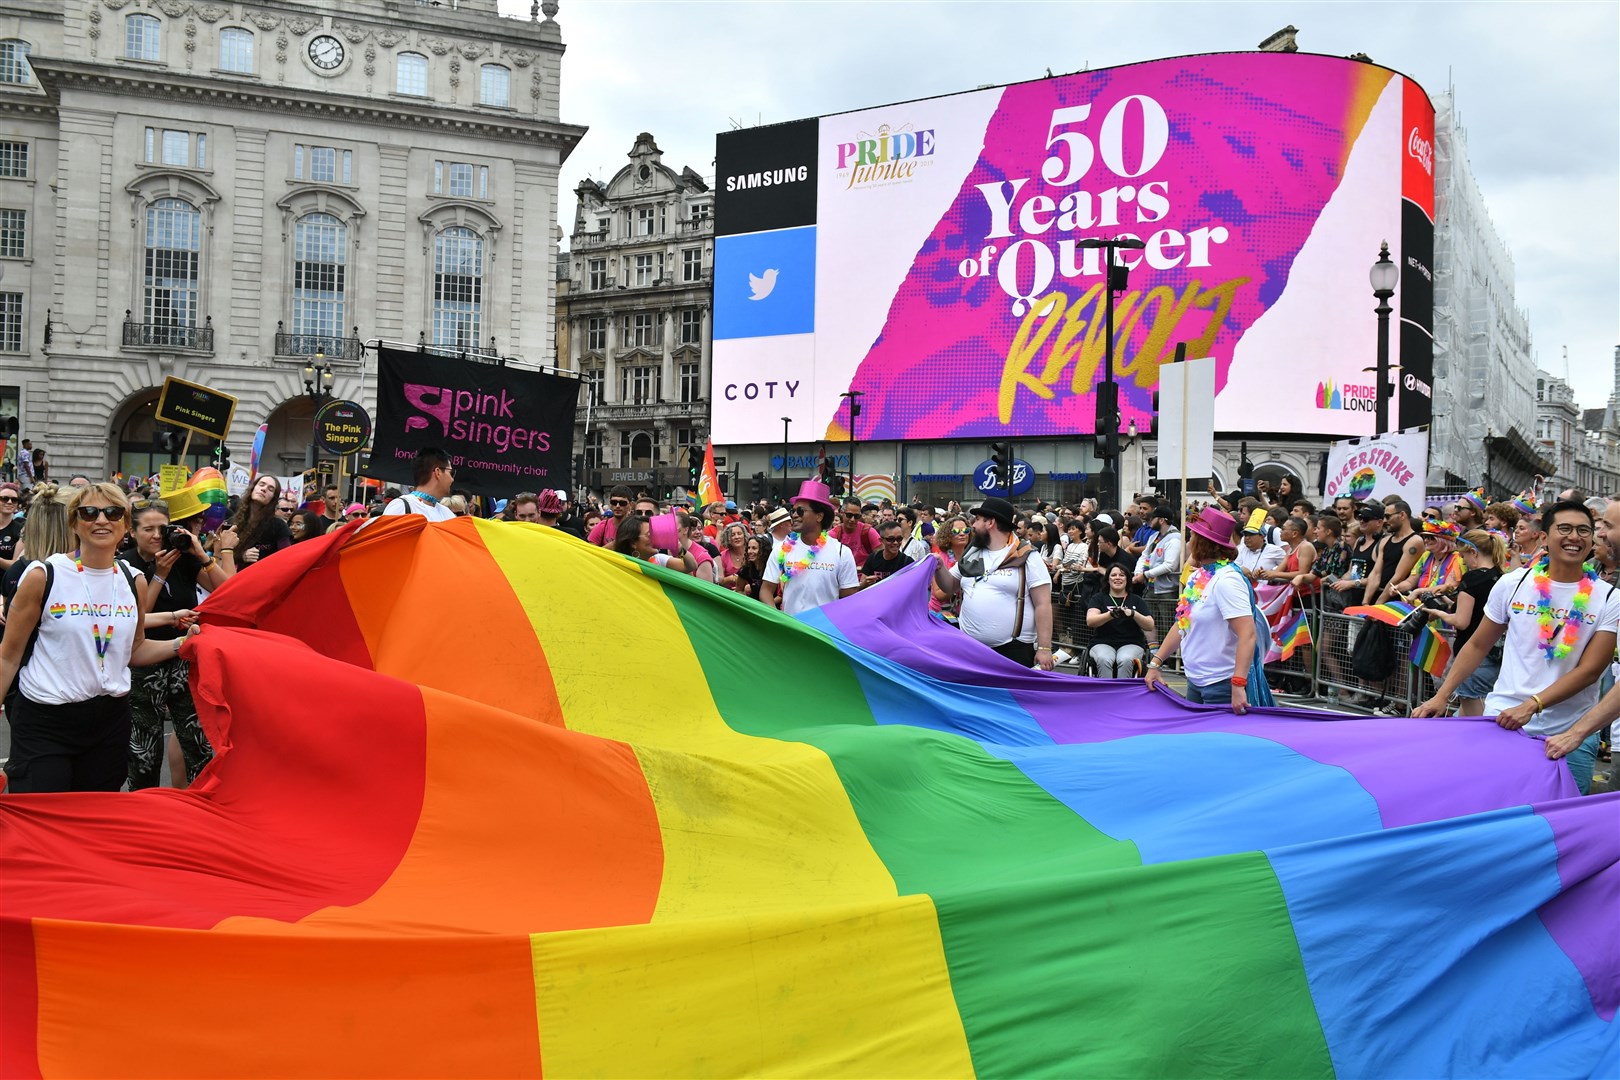 Members of the public watch during the Pride in London Parade in central London in 2019 (Dominic Lipinsky/PA)